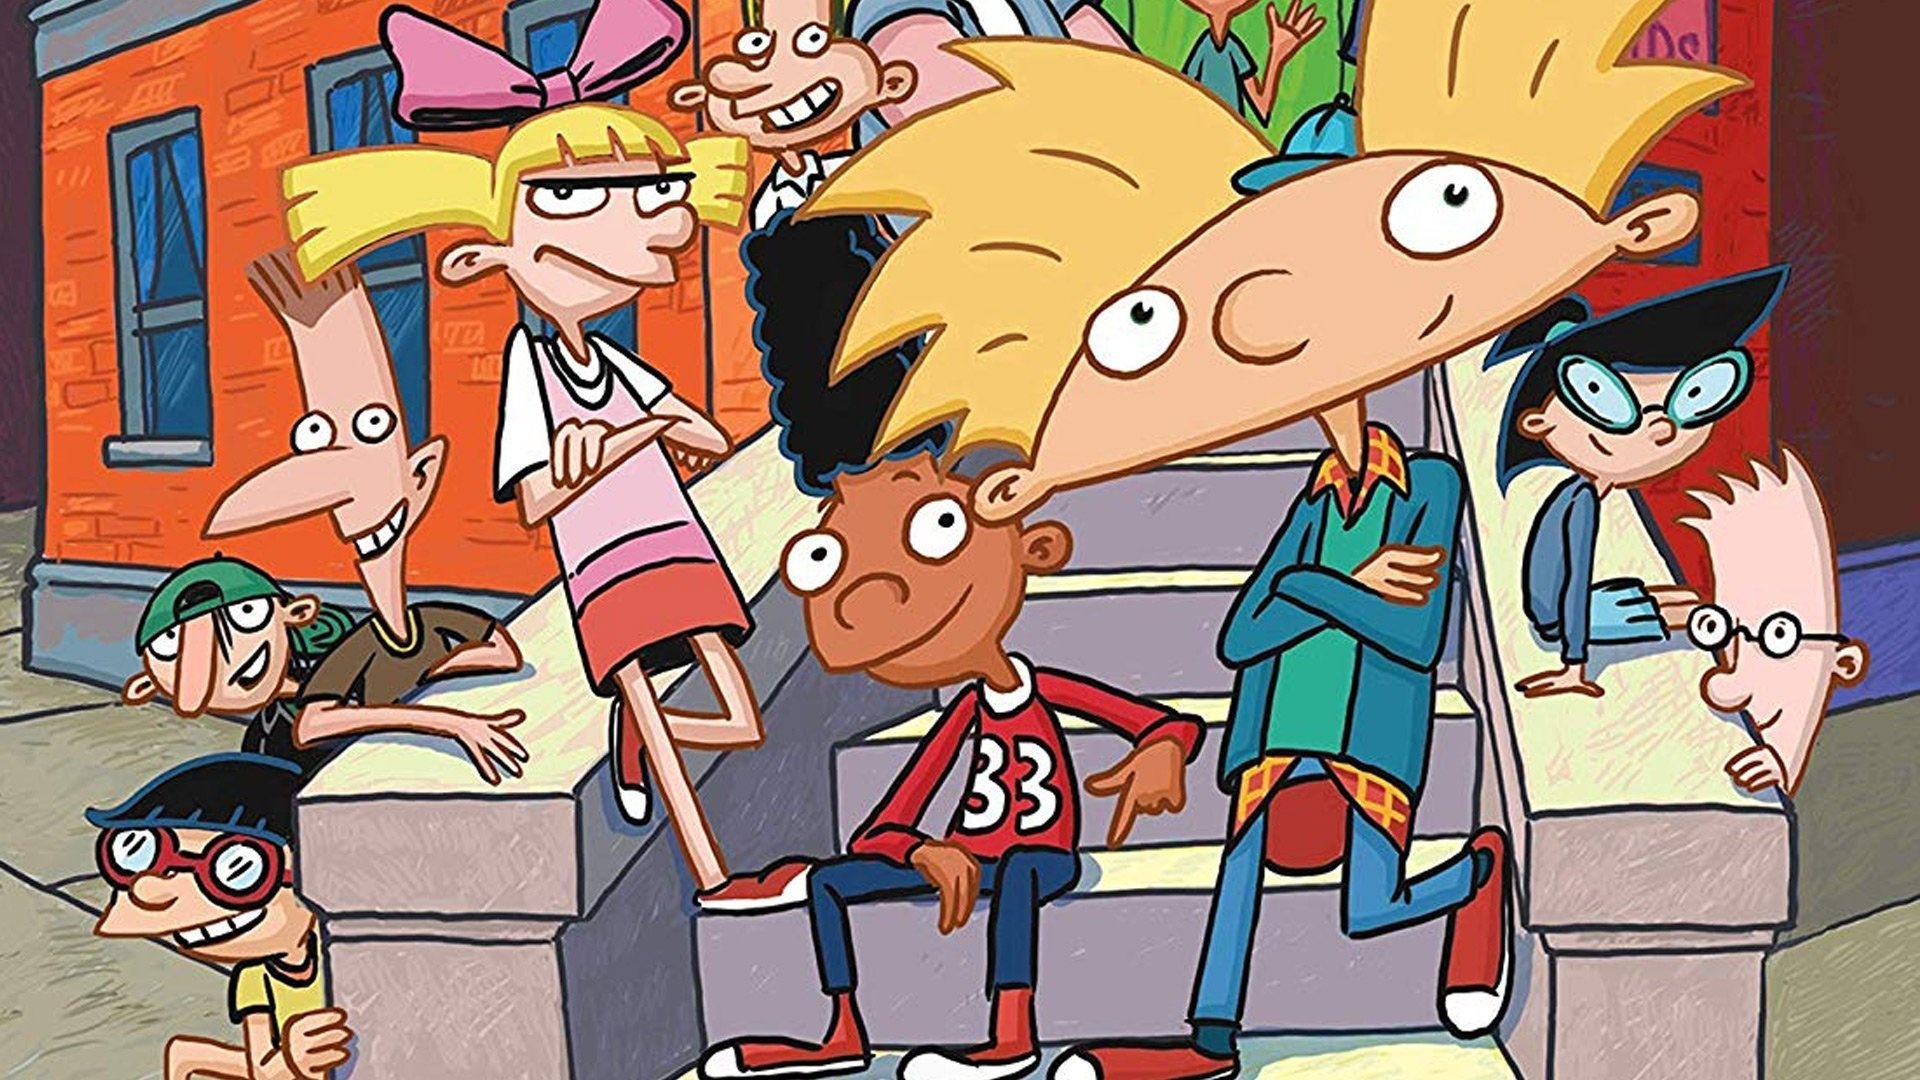 Hey Arnold cartoon goodies, Transparent PNG images, Hey Arnold animation, 1920x1080 Full HD Desktop